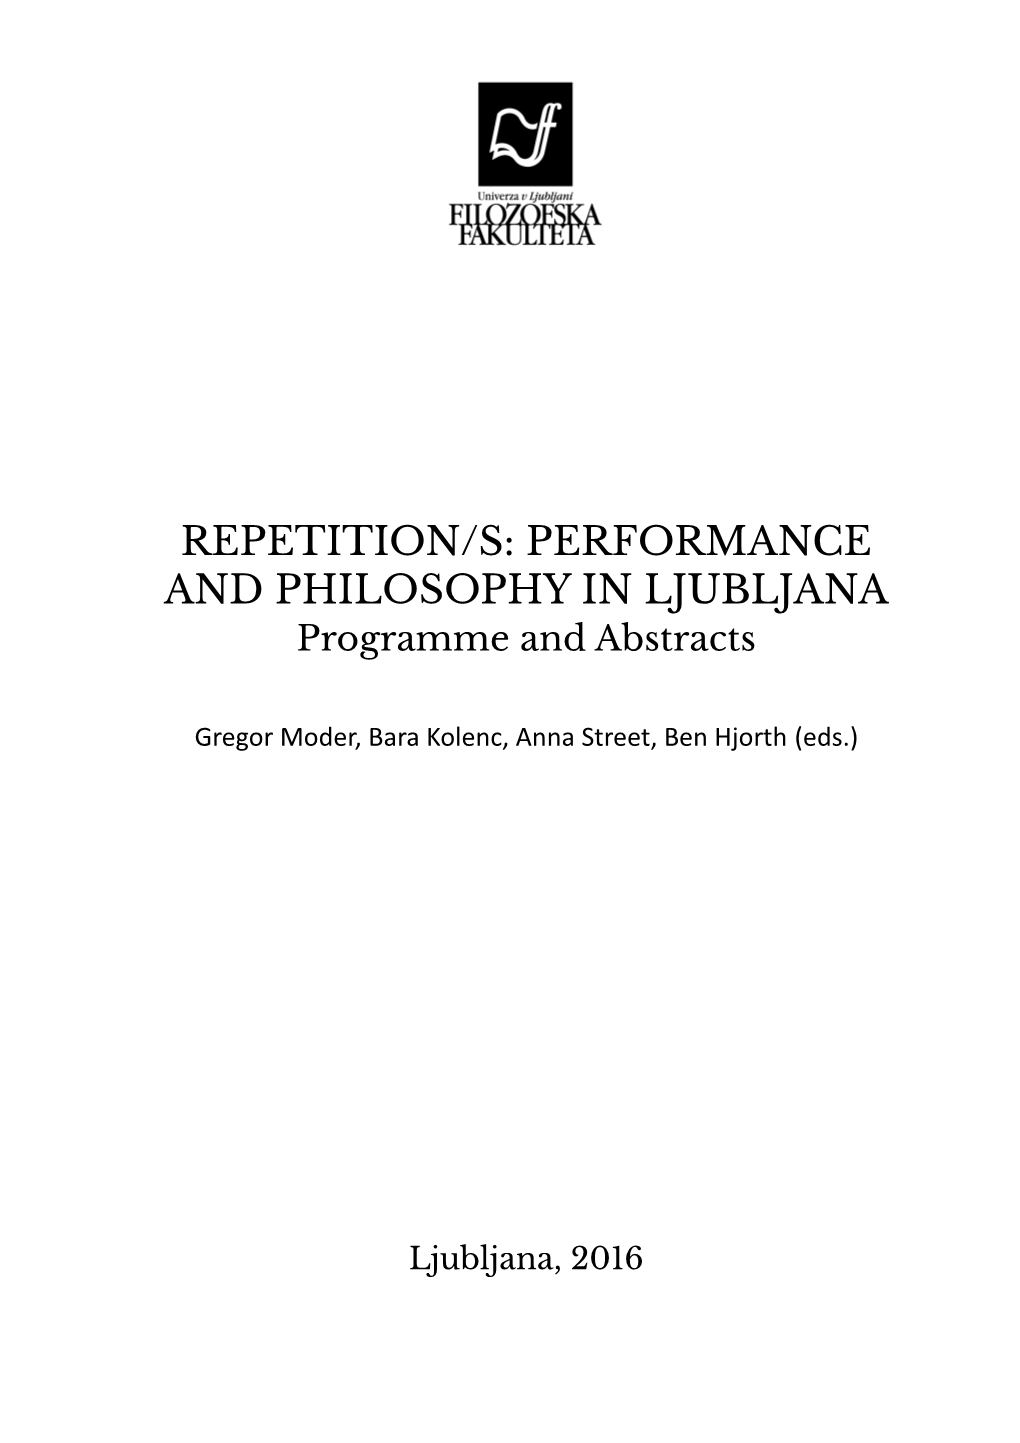 Repetition/S: Performance and Philosophy in Ljubljana